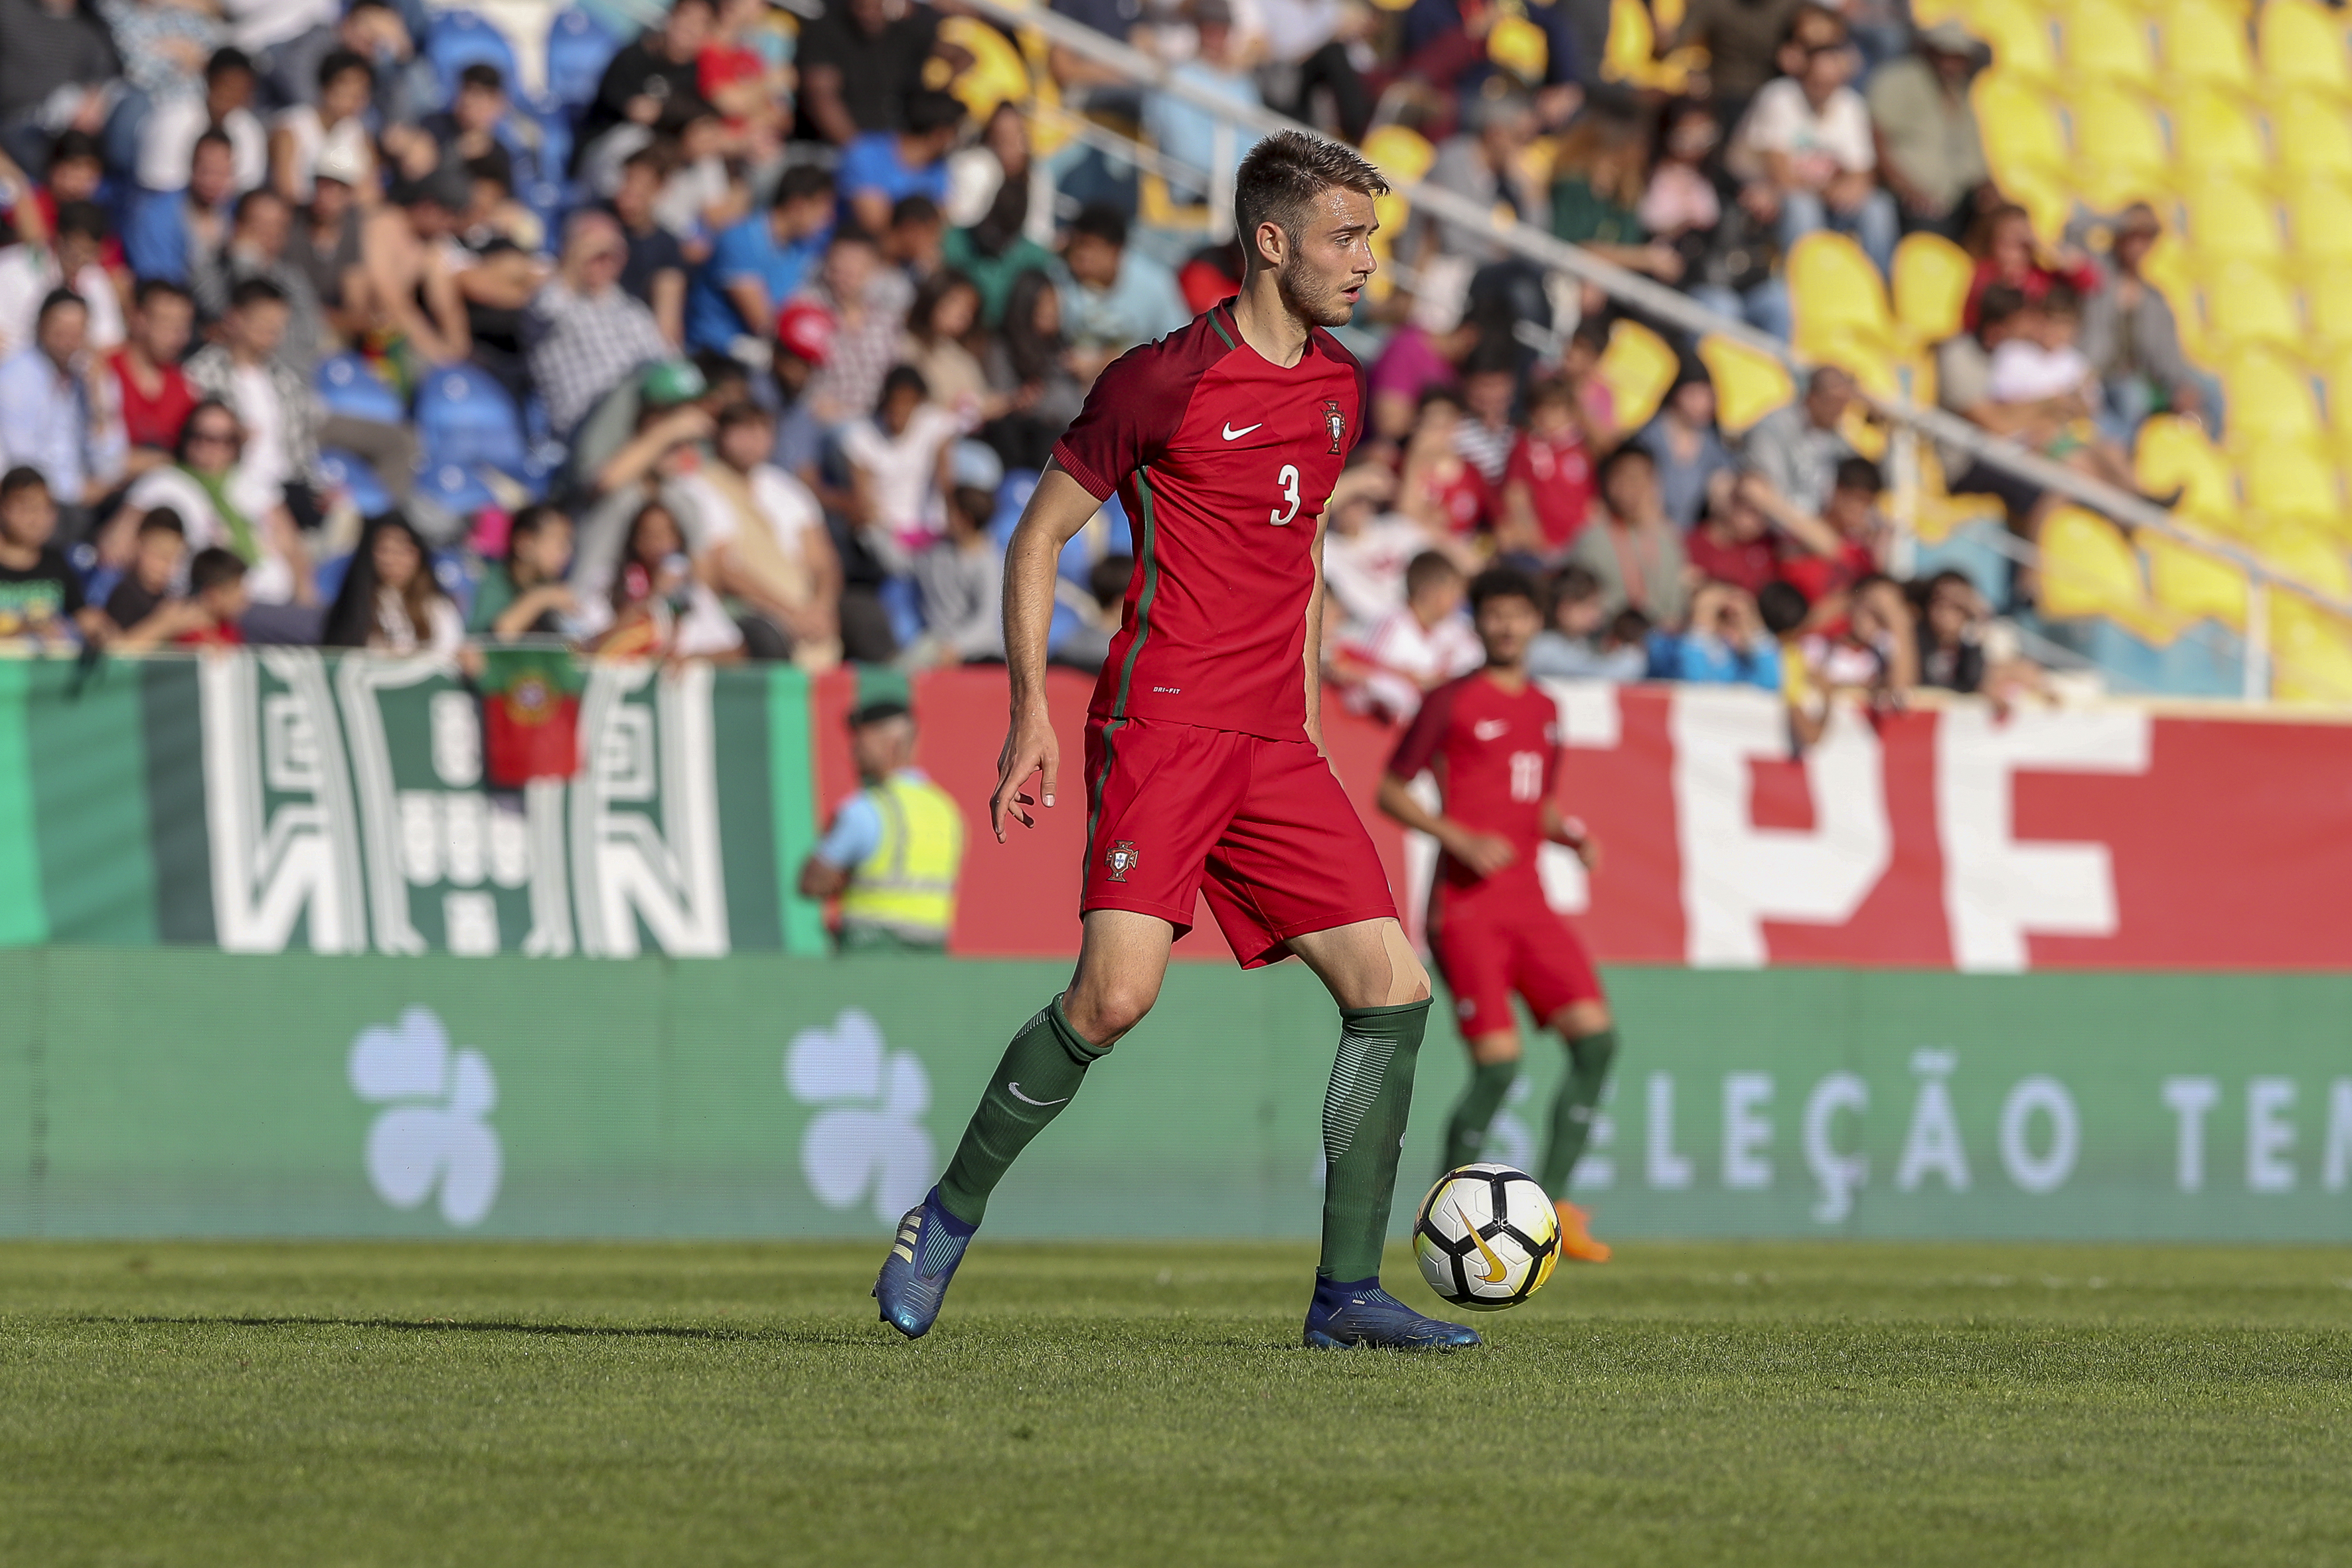 ESTORIL, PORTUGAL - MAY 24: Portugal defender Francisco Ferreira during the International Friendly match between Portugal U21 and Italy U21 at Estadio Antonio Coimbra da Mota on May 24, 2018 in Estoril, Portugal. (Photo by Carlos Rodrigues/Getty Images)